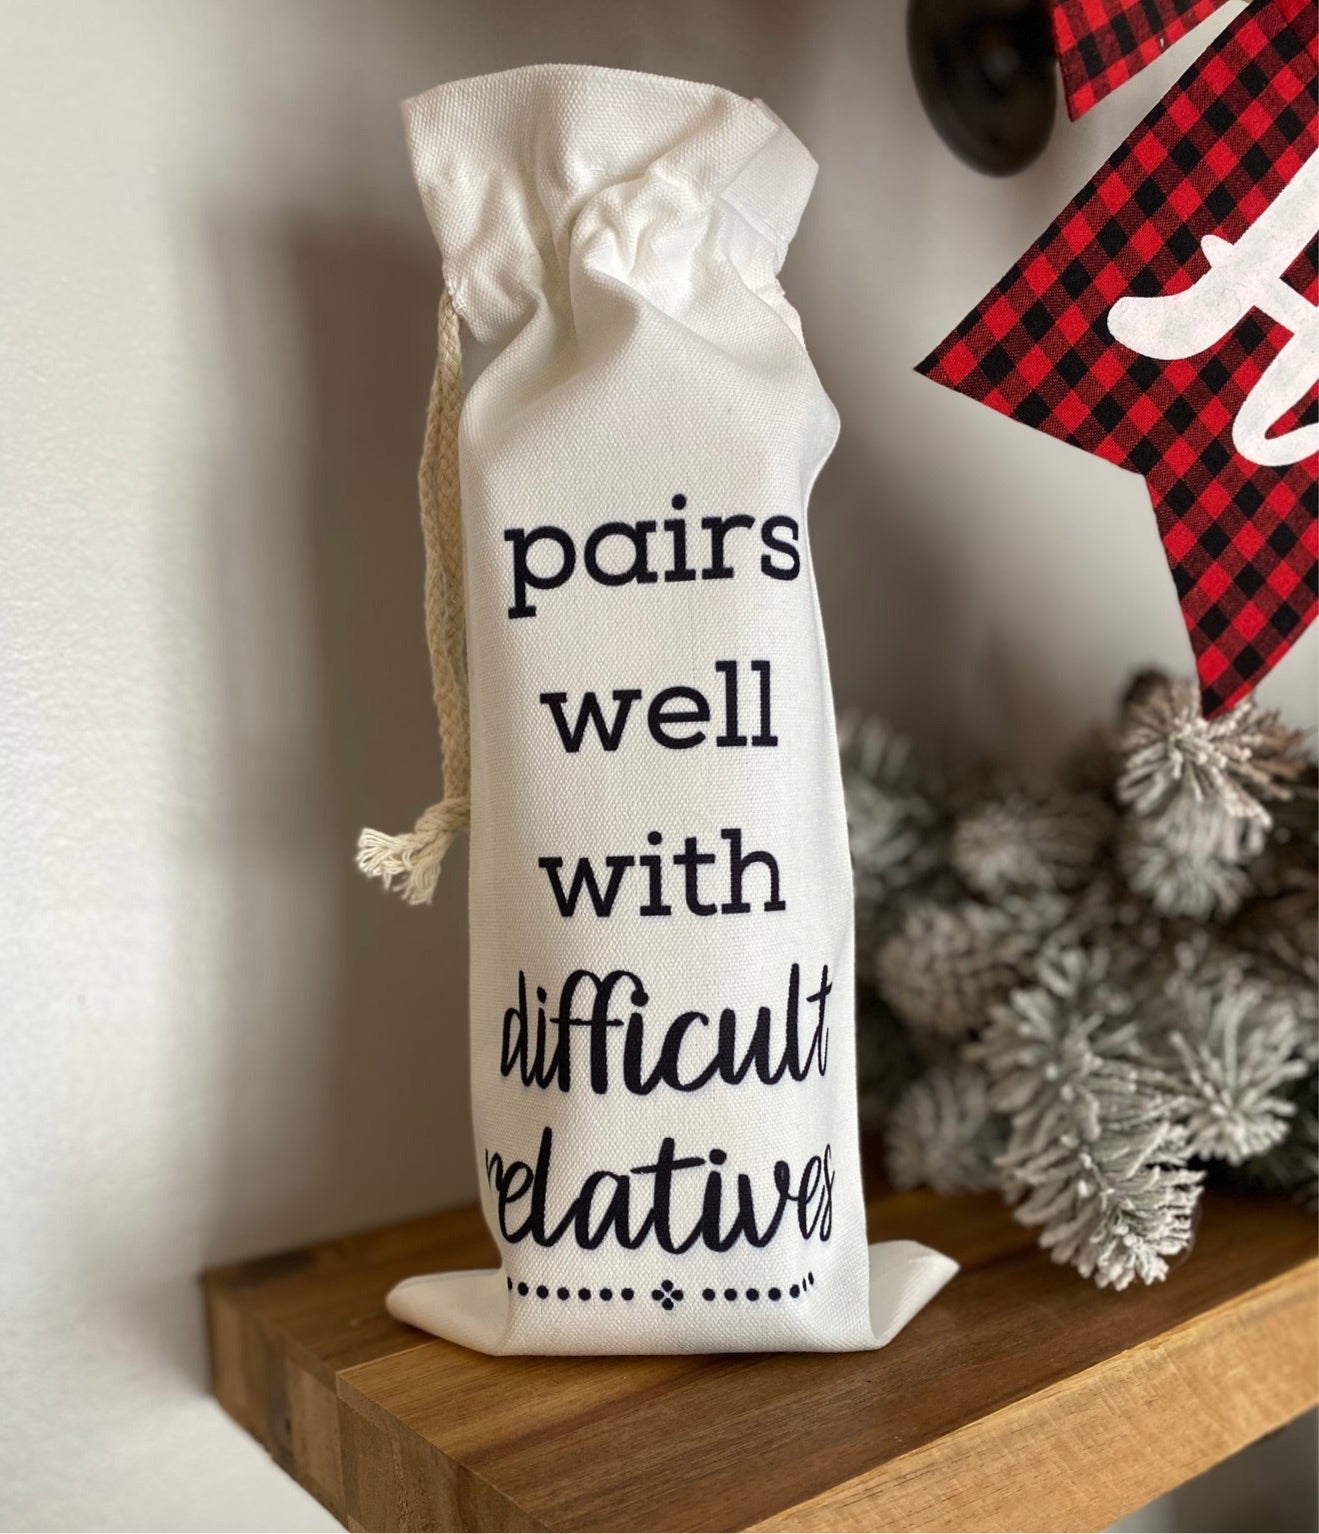 Pairs Well with Difficult Relatives - Reusable Wine Bag